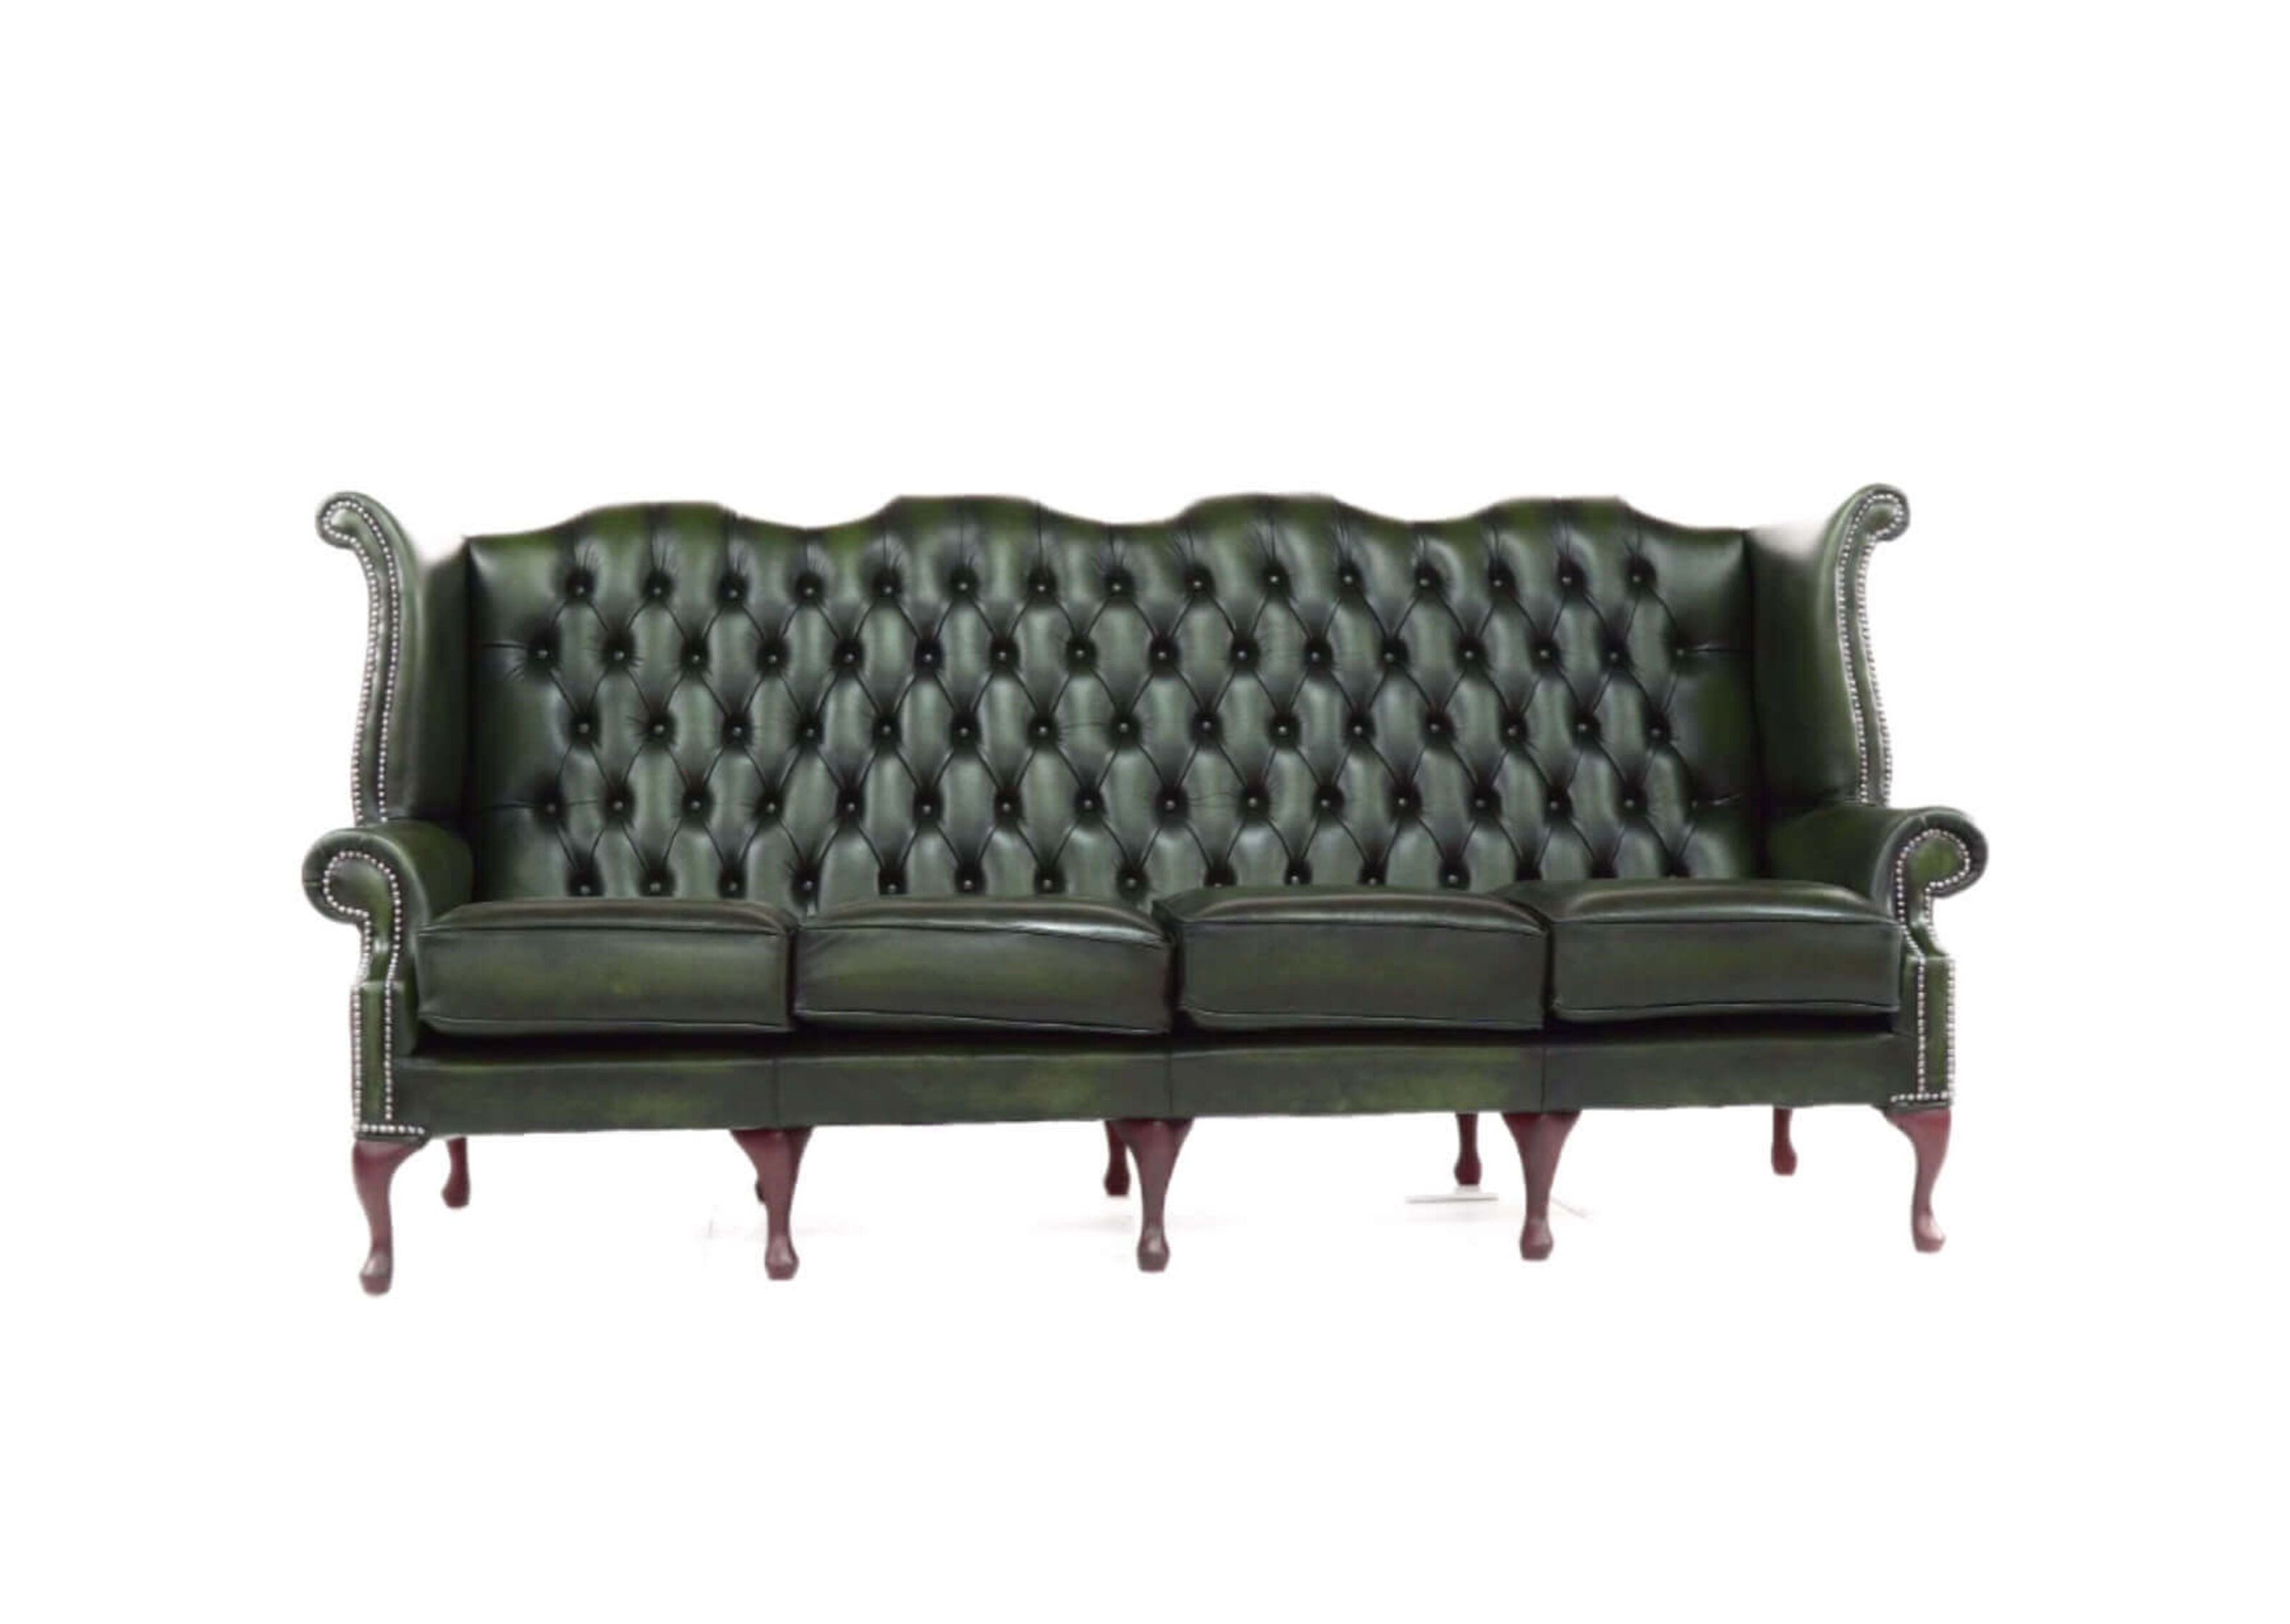 Edmonton Elegance Finding the Perfect Chesterfield Sofa  %Post Title